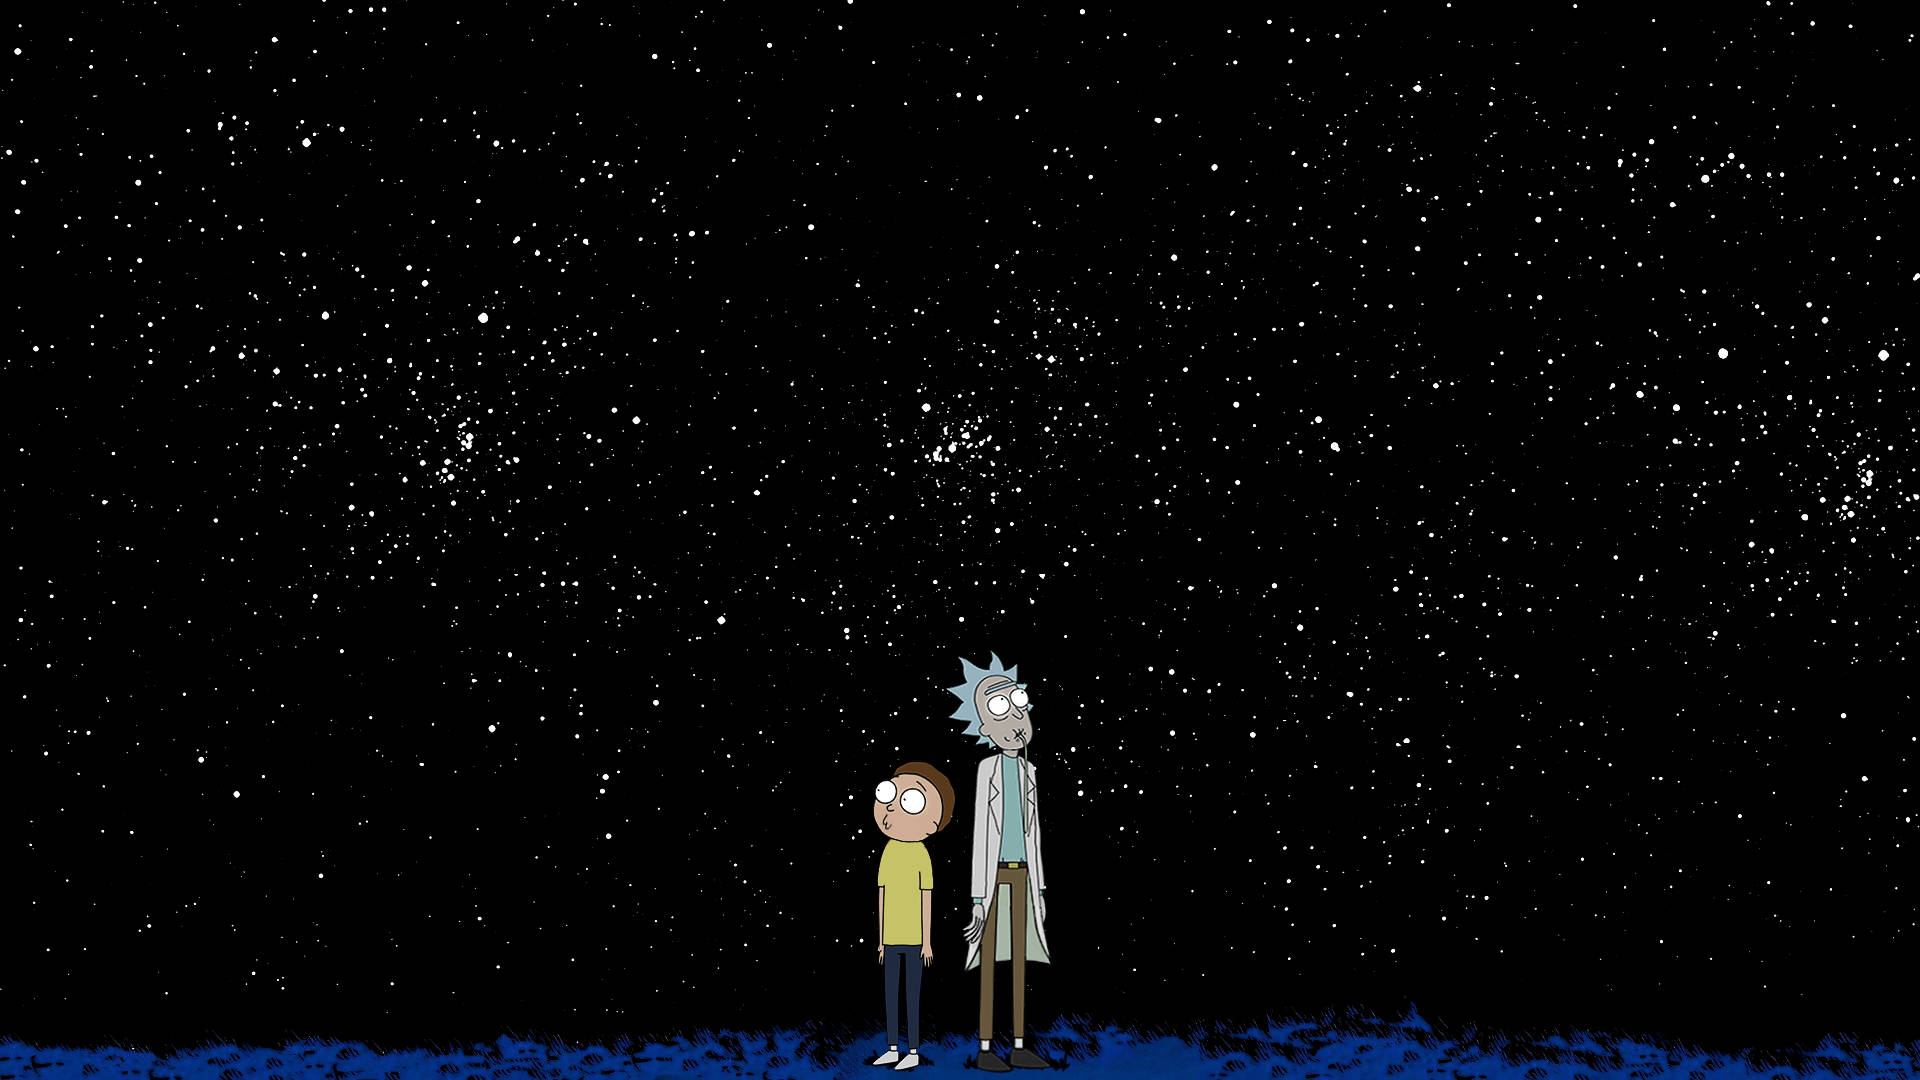 Rick and Morty look up in awe admiring the beautiful night sky. Wallpaper